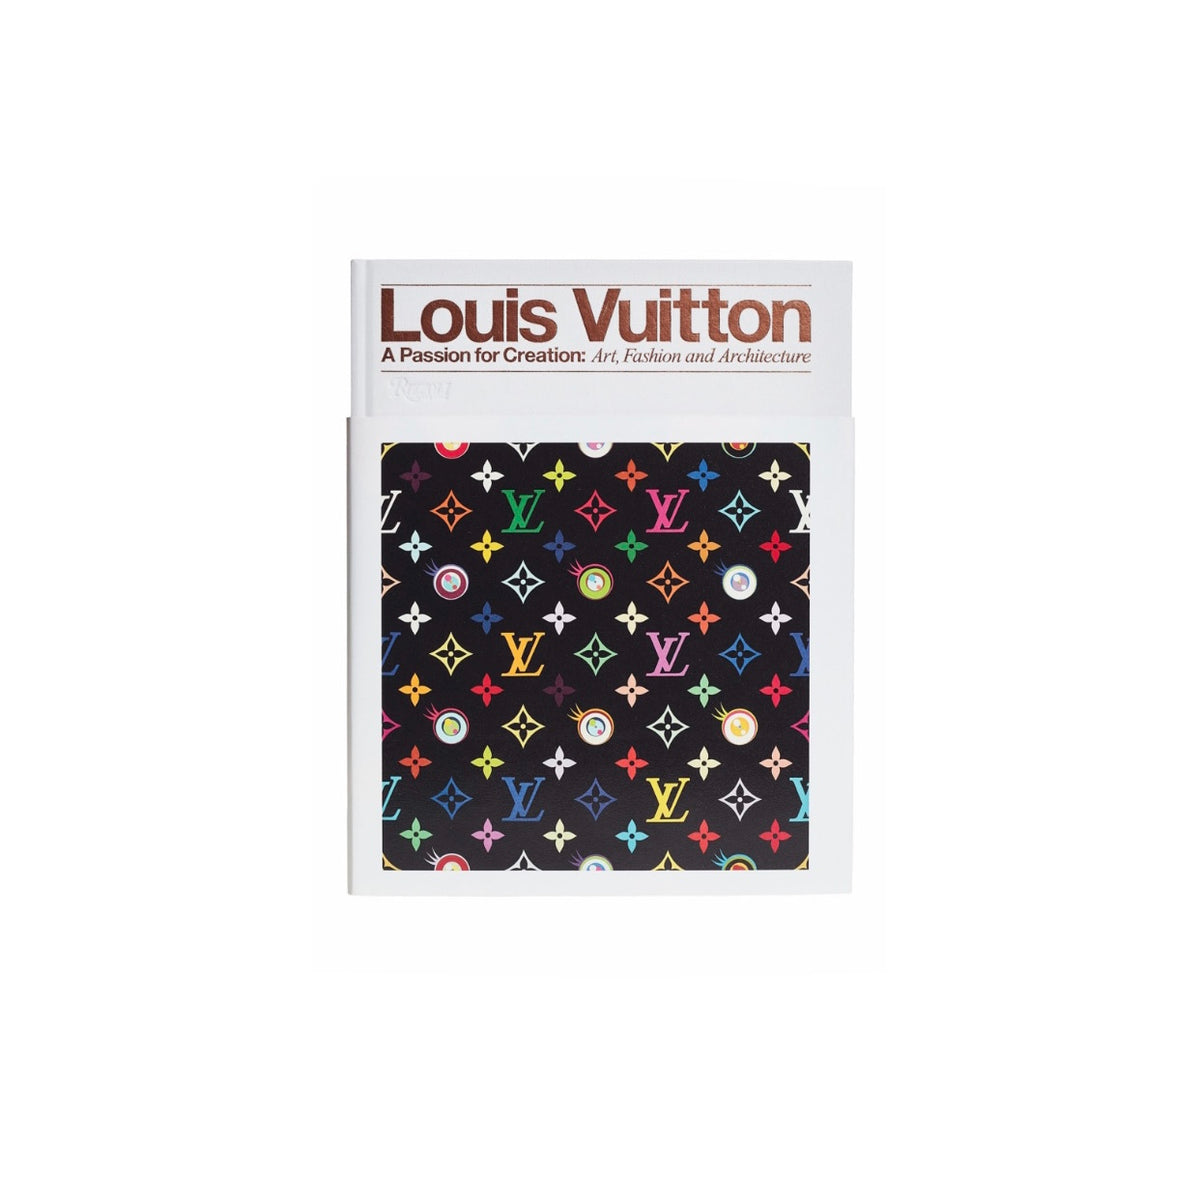 LOUIS VUITTON : A PASSION FOR CREATION : ART,FASHION AND ARCHITECTURE